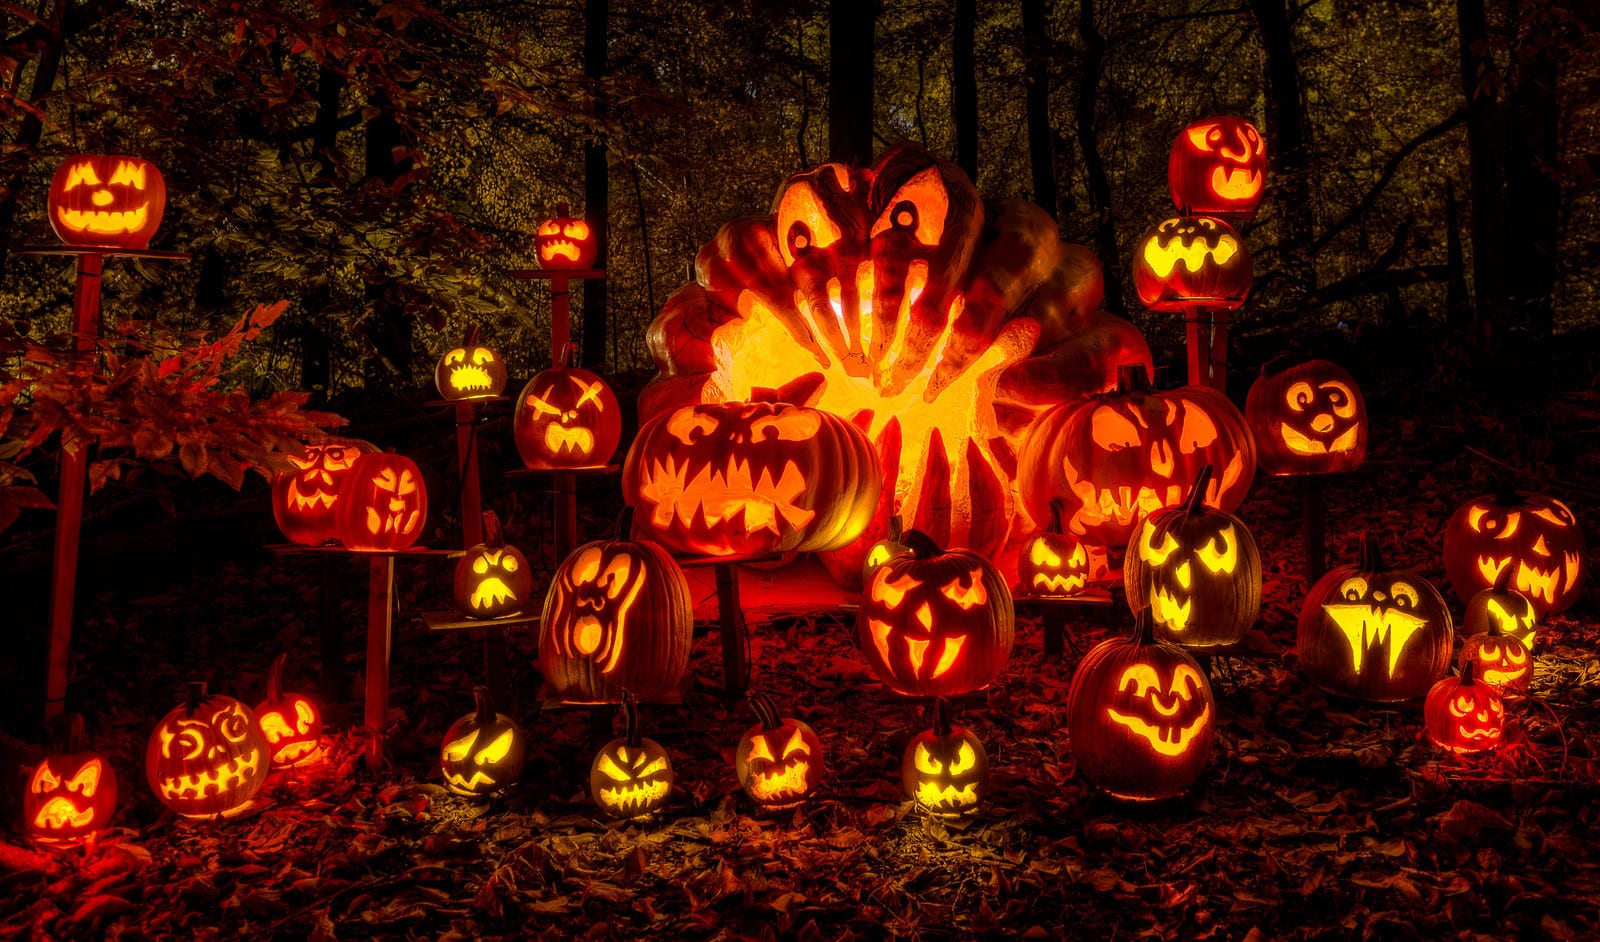 31 Scary Story Nights: October 31 